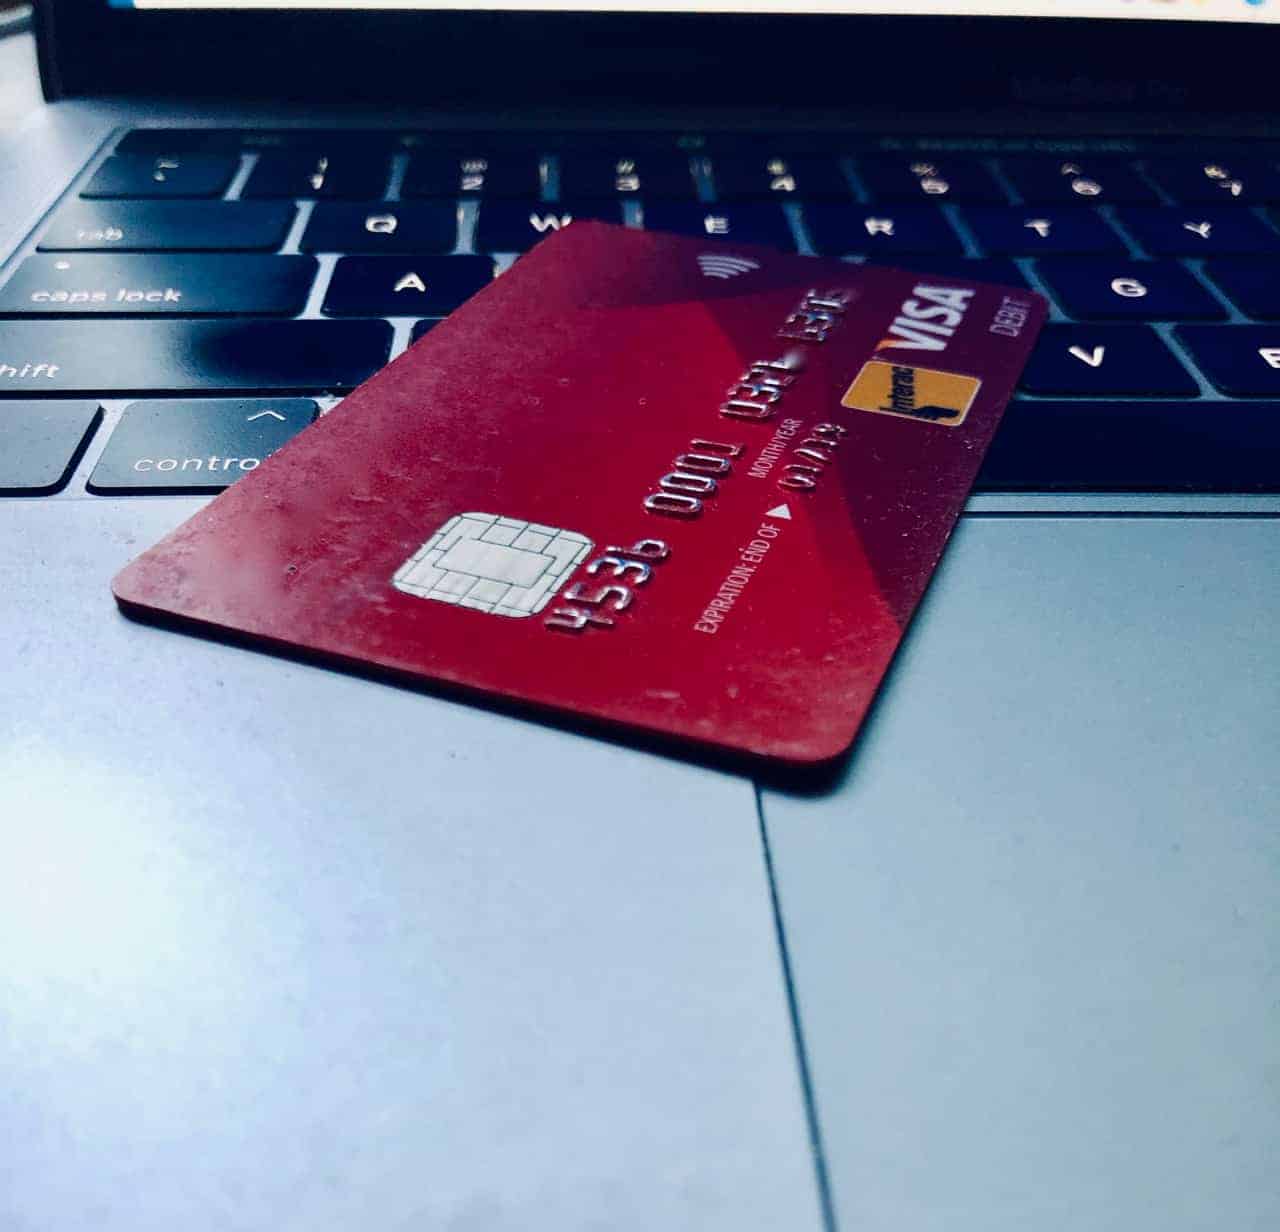 Credit and Prepaid Card Issuer Cornèr Bank Group Reaches Key Digital Transformation Milestone by Transitioning to Improved Platform